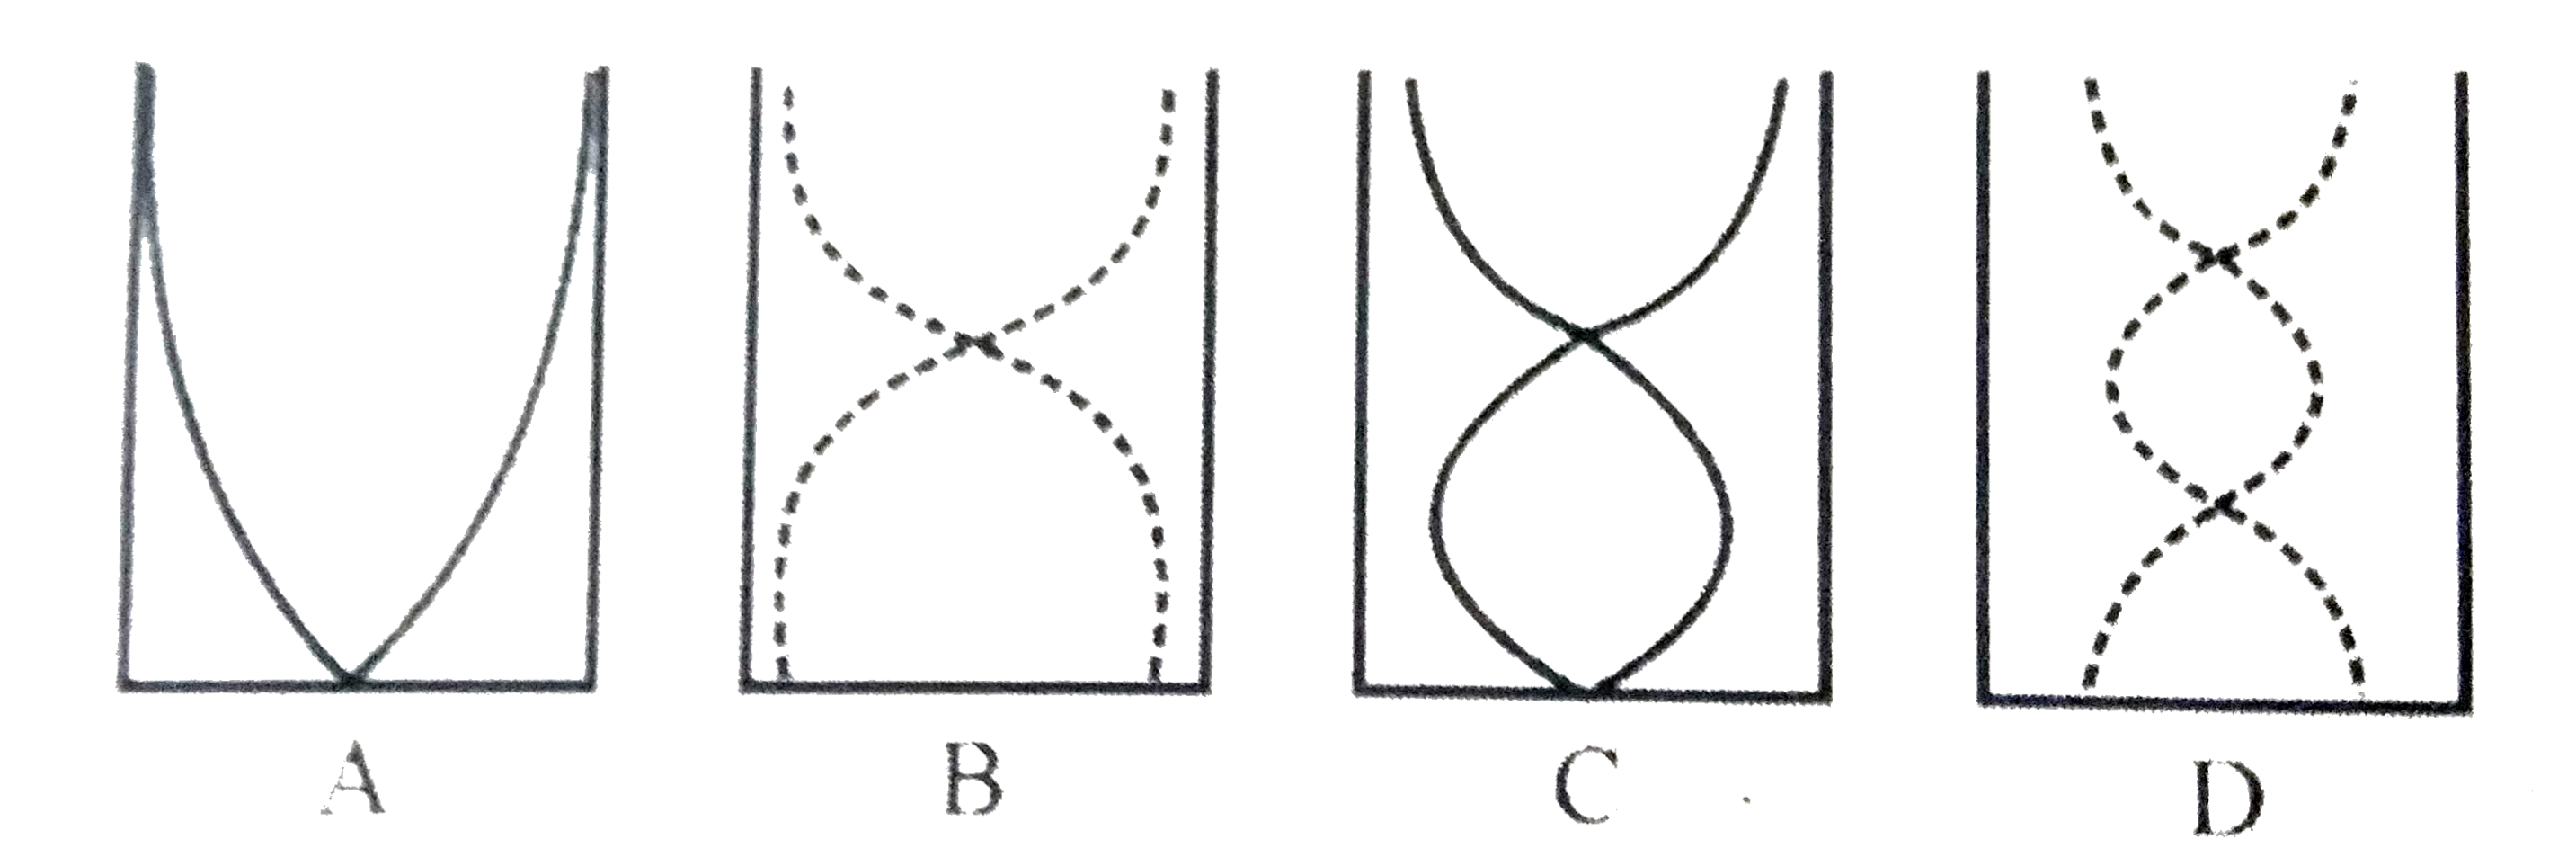 If the vibrations of four air columns are as shown in the figures A , B, C , D then the ratio of their frequencies  i.e. N(A) : N(B) : N(C) : N(D)  is